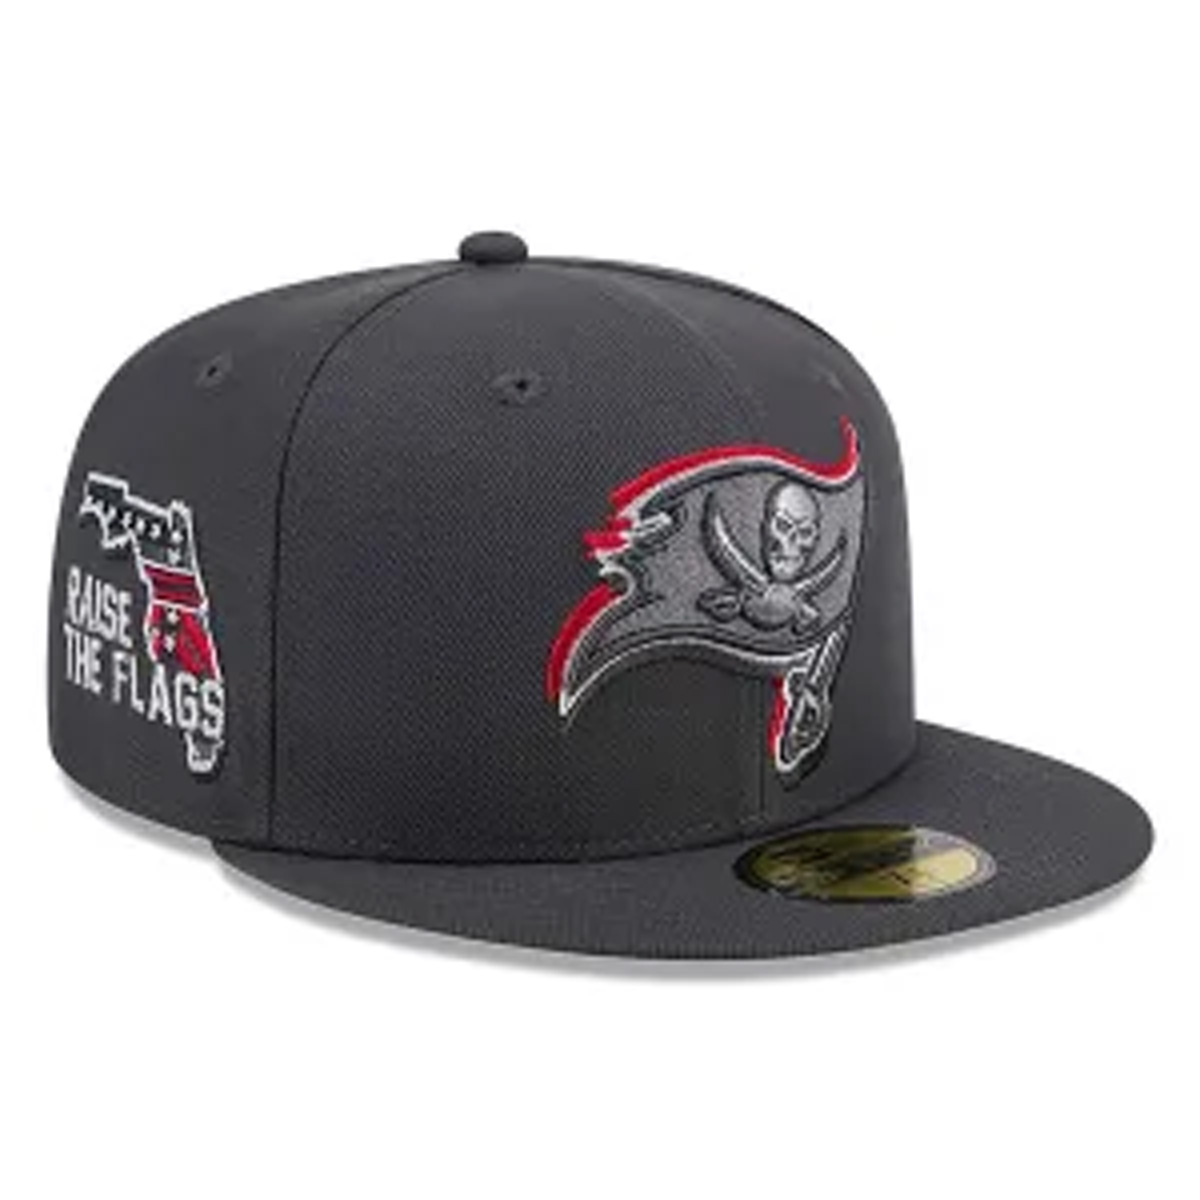 Check out the new Tampa Bay Buccaneers 2024 NFL Draft hat